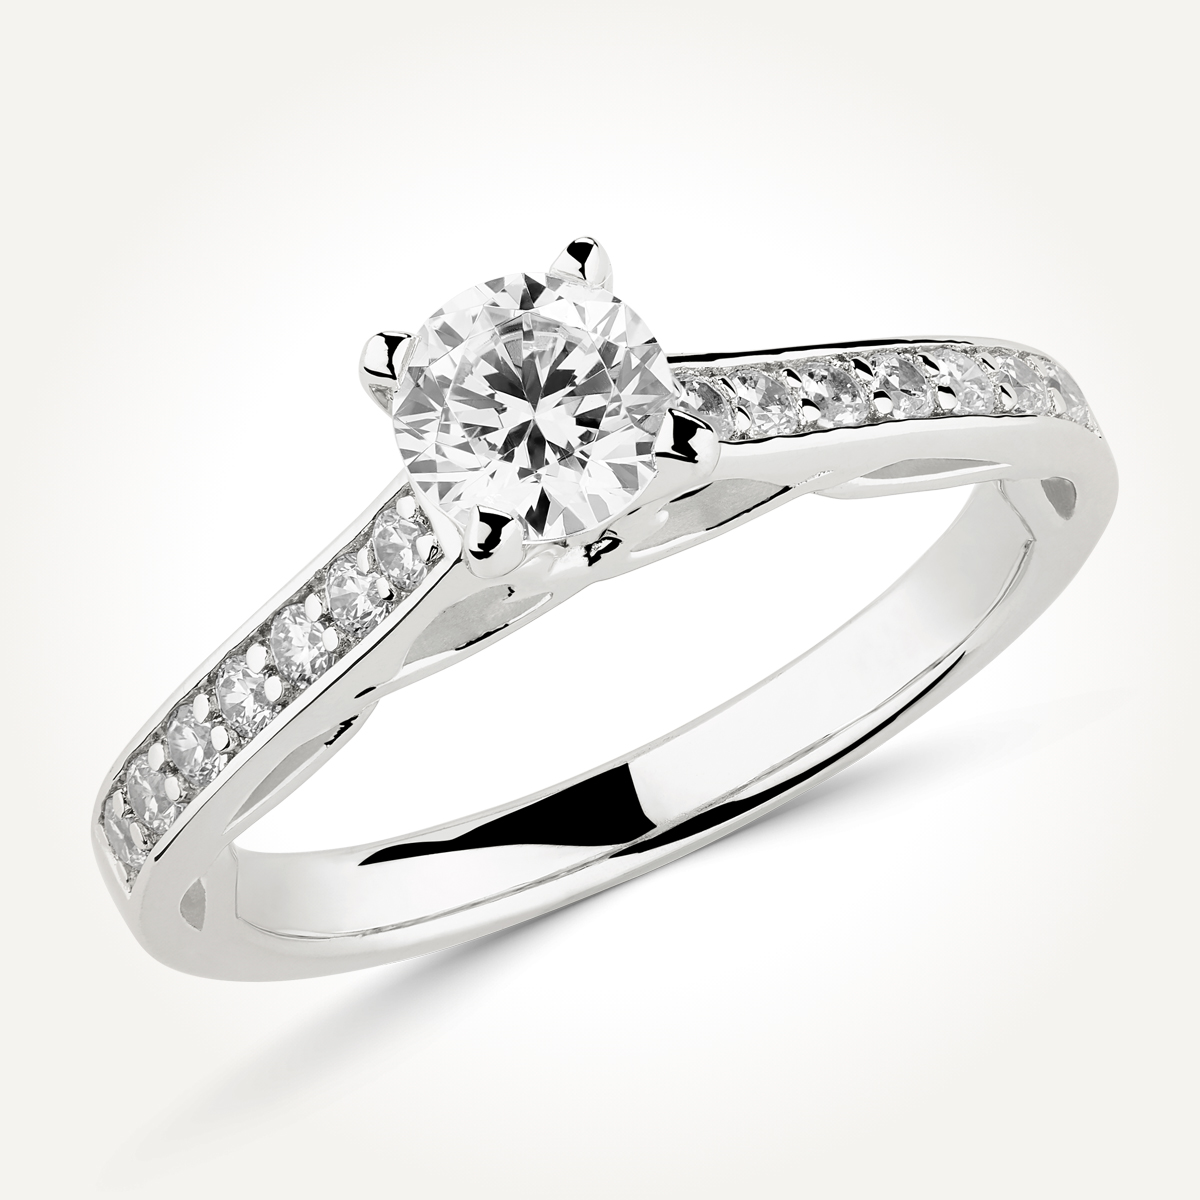 Multi Stone Engagement Ring - 7647 A